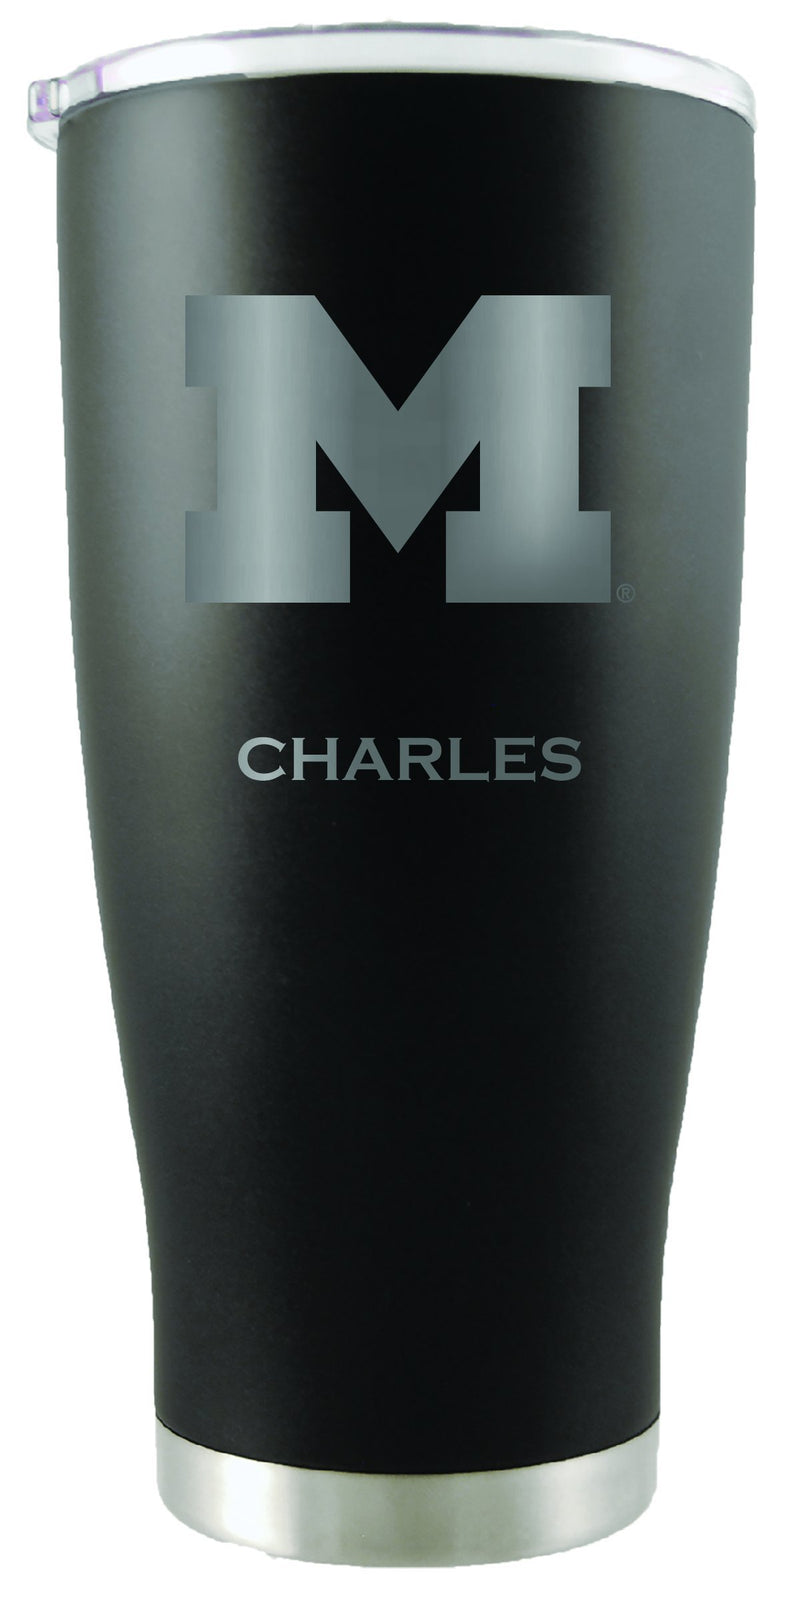 20oz Black Personalized Stainless Steel Tumbler | Michigan Wolverines
COL, CurrentProduct, Drinkware_category_All, MH, Michigan Wolverines, Personalized_Personalized
The Memory Company